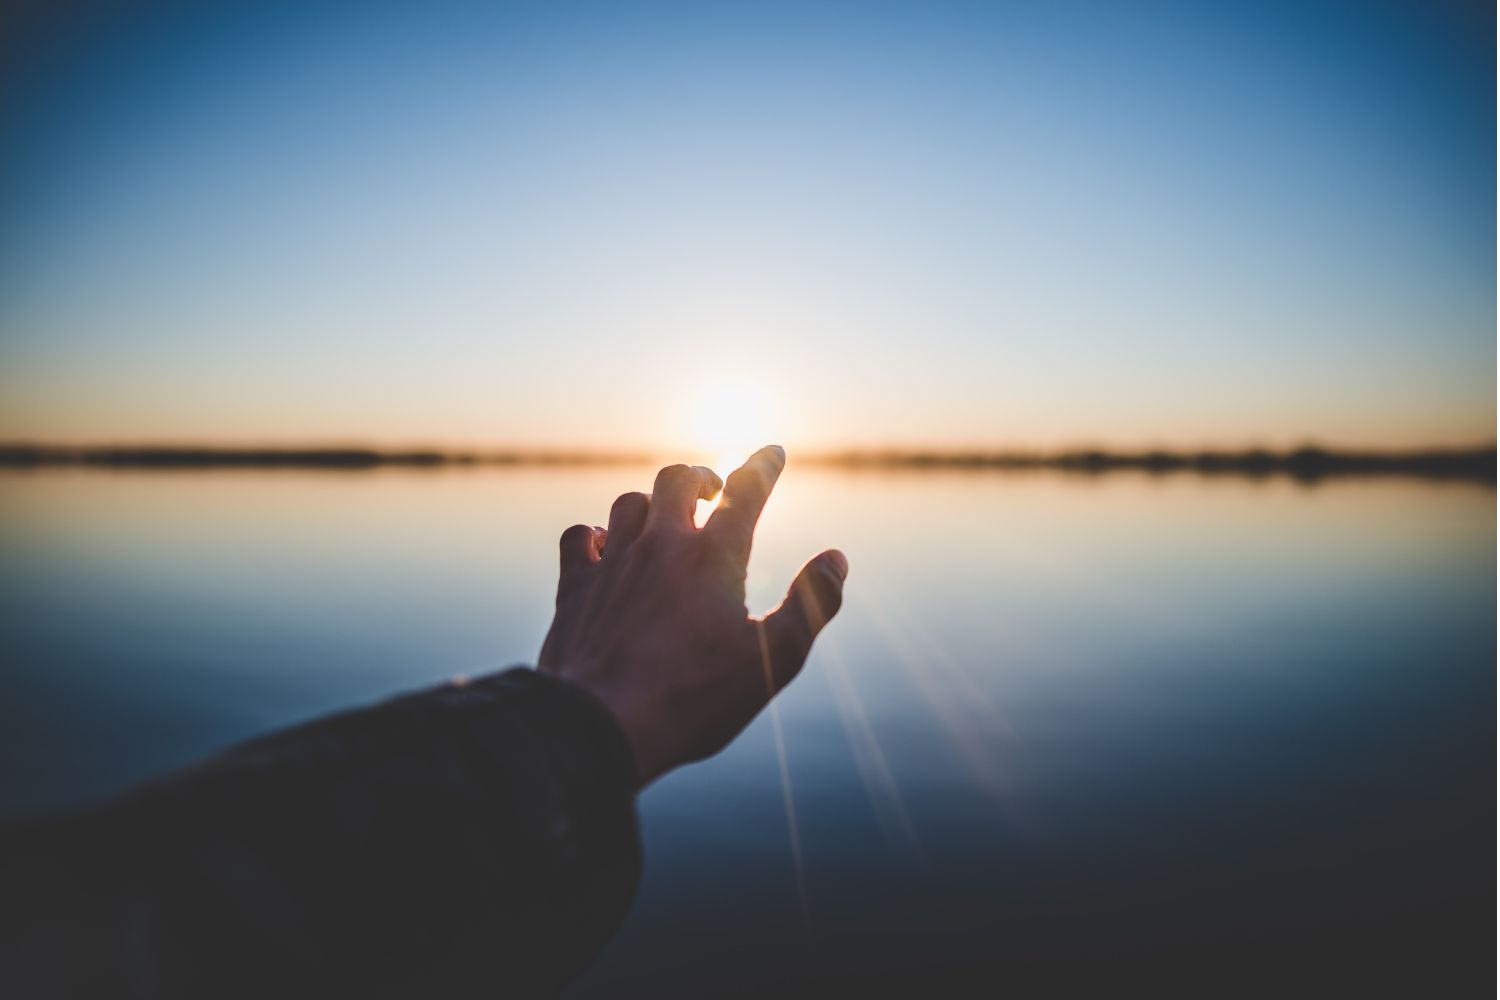 Grasp the sunlight with your hands Photo by Marc Olivier Jodoin on unsplash